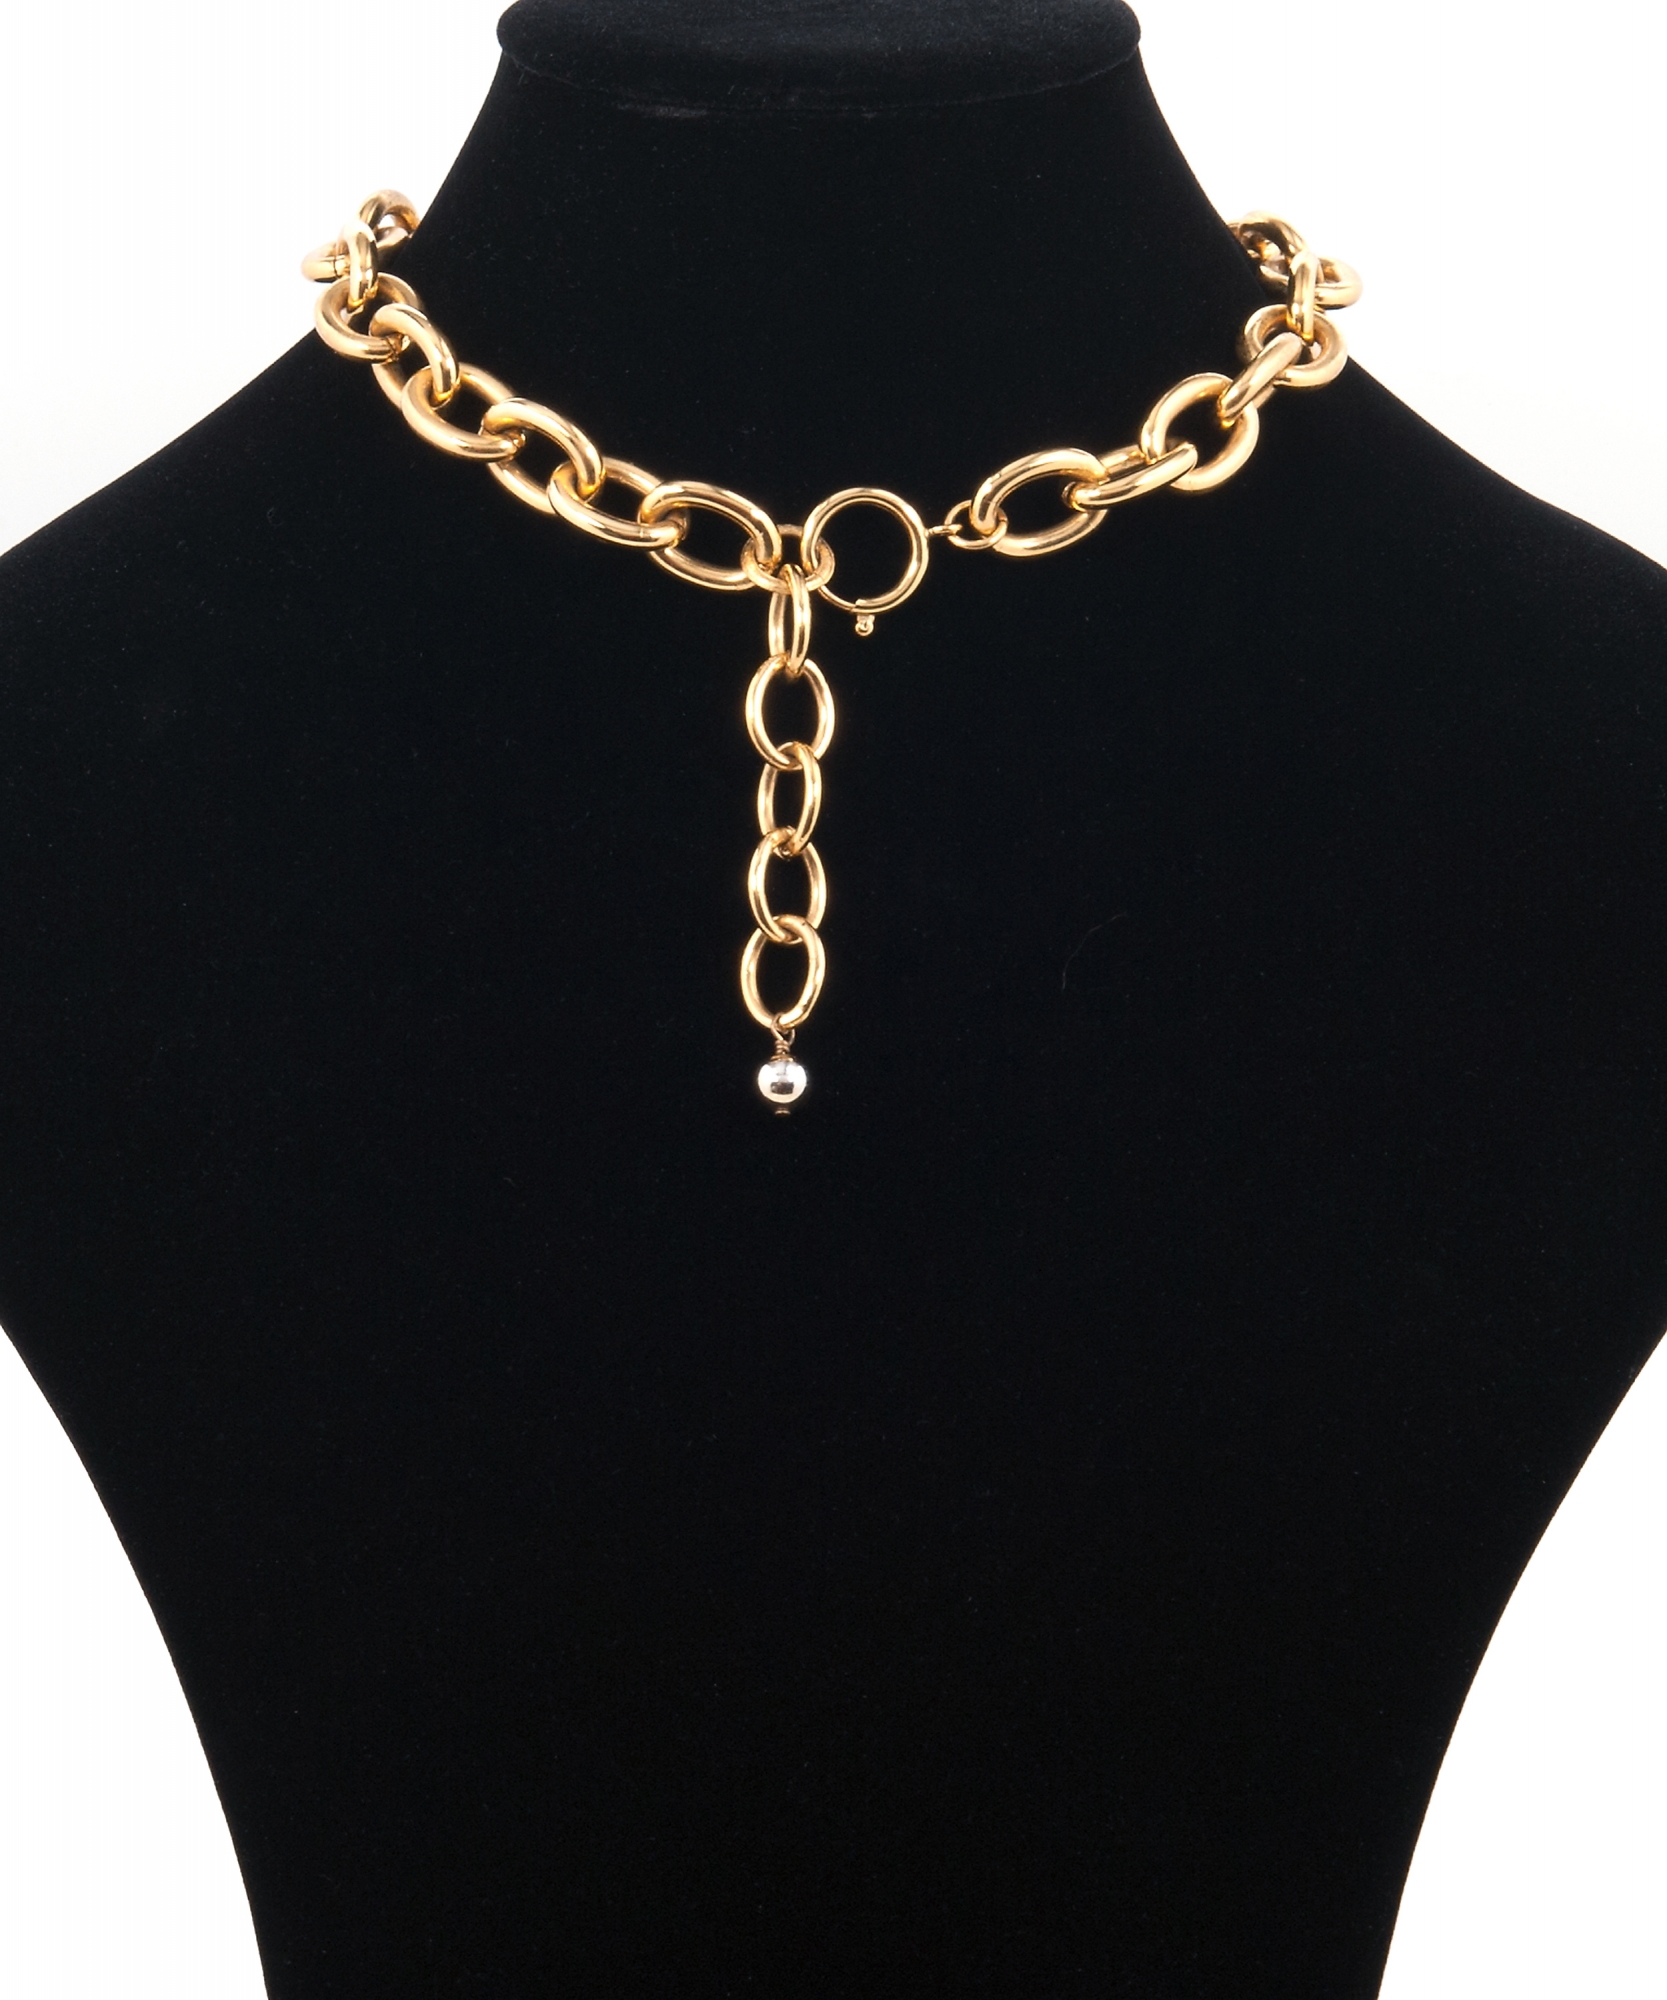 CHANEL CC THICK GOLD CHAIN LOGO NECKLACE CHOKER